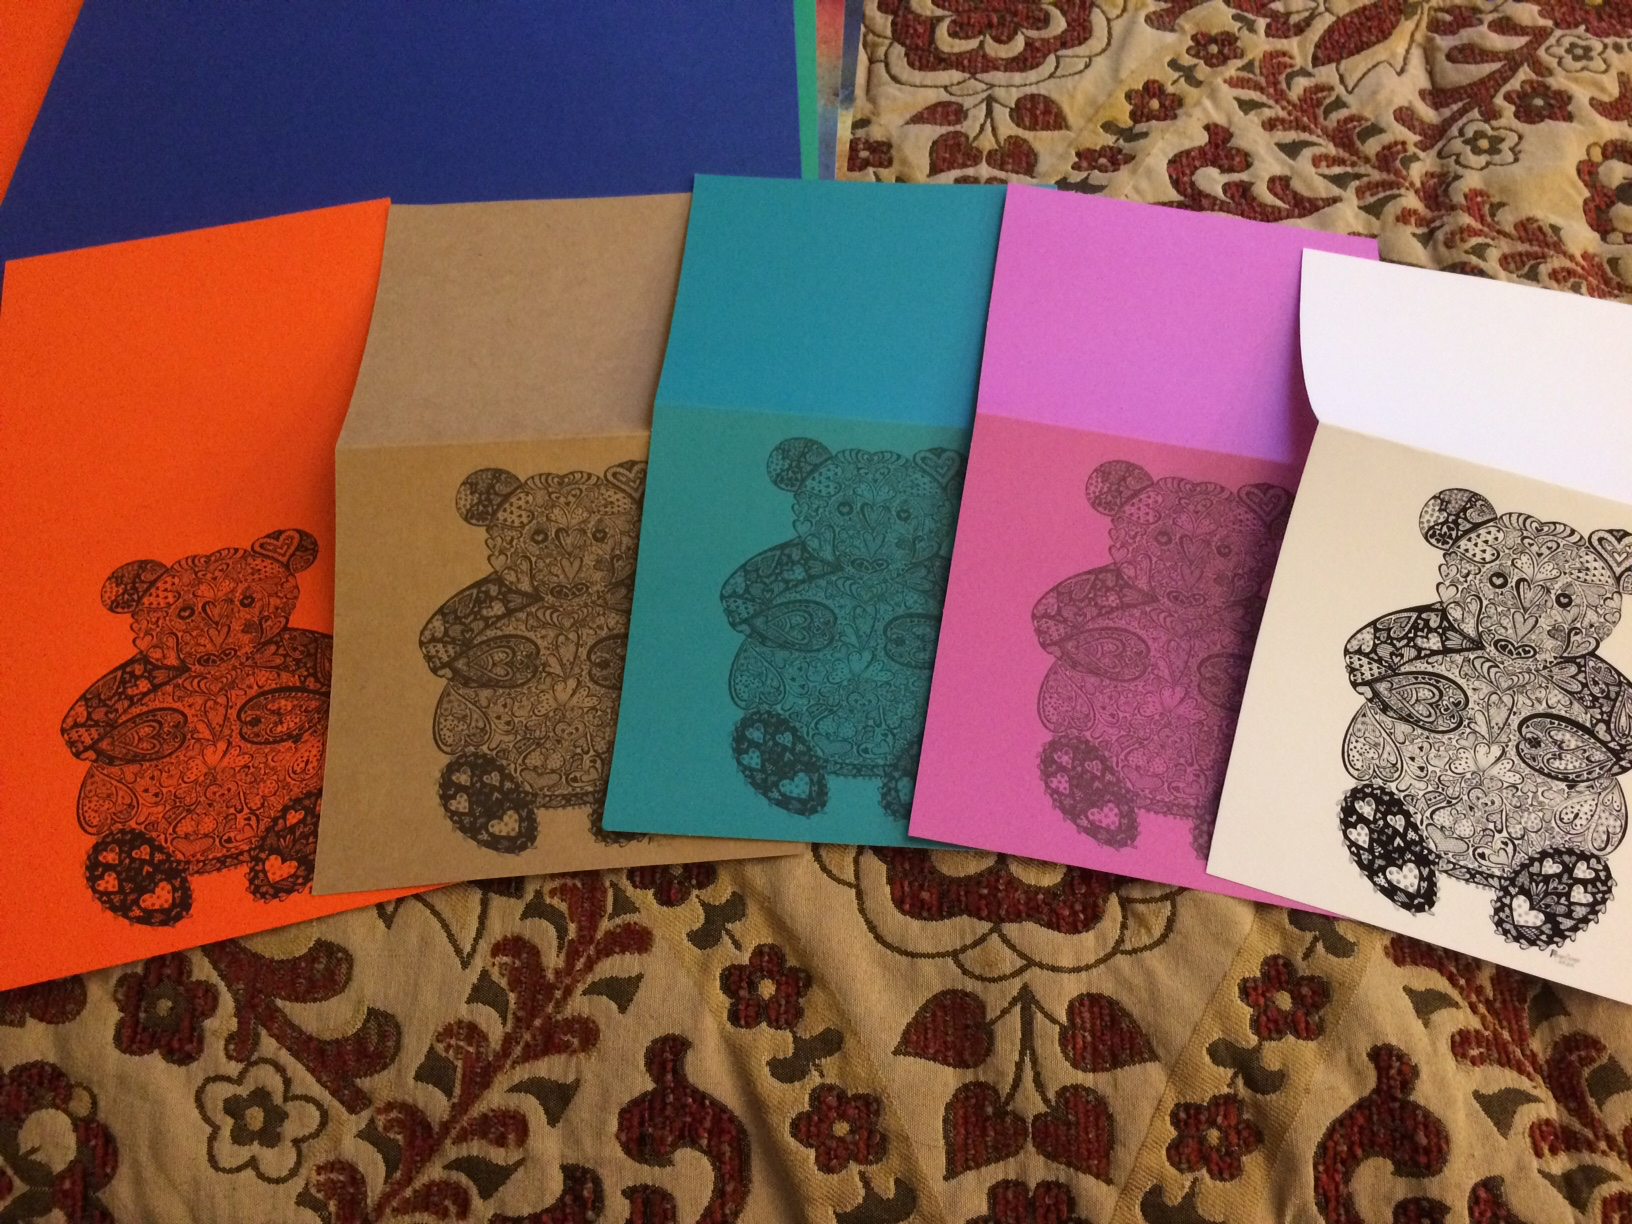 Printing on Colored Paper Instead of Using Color Inks